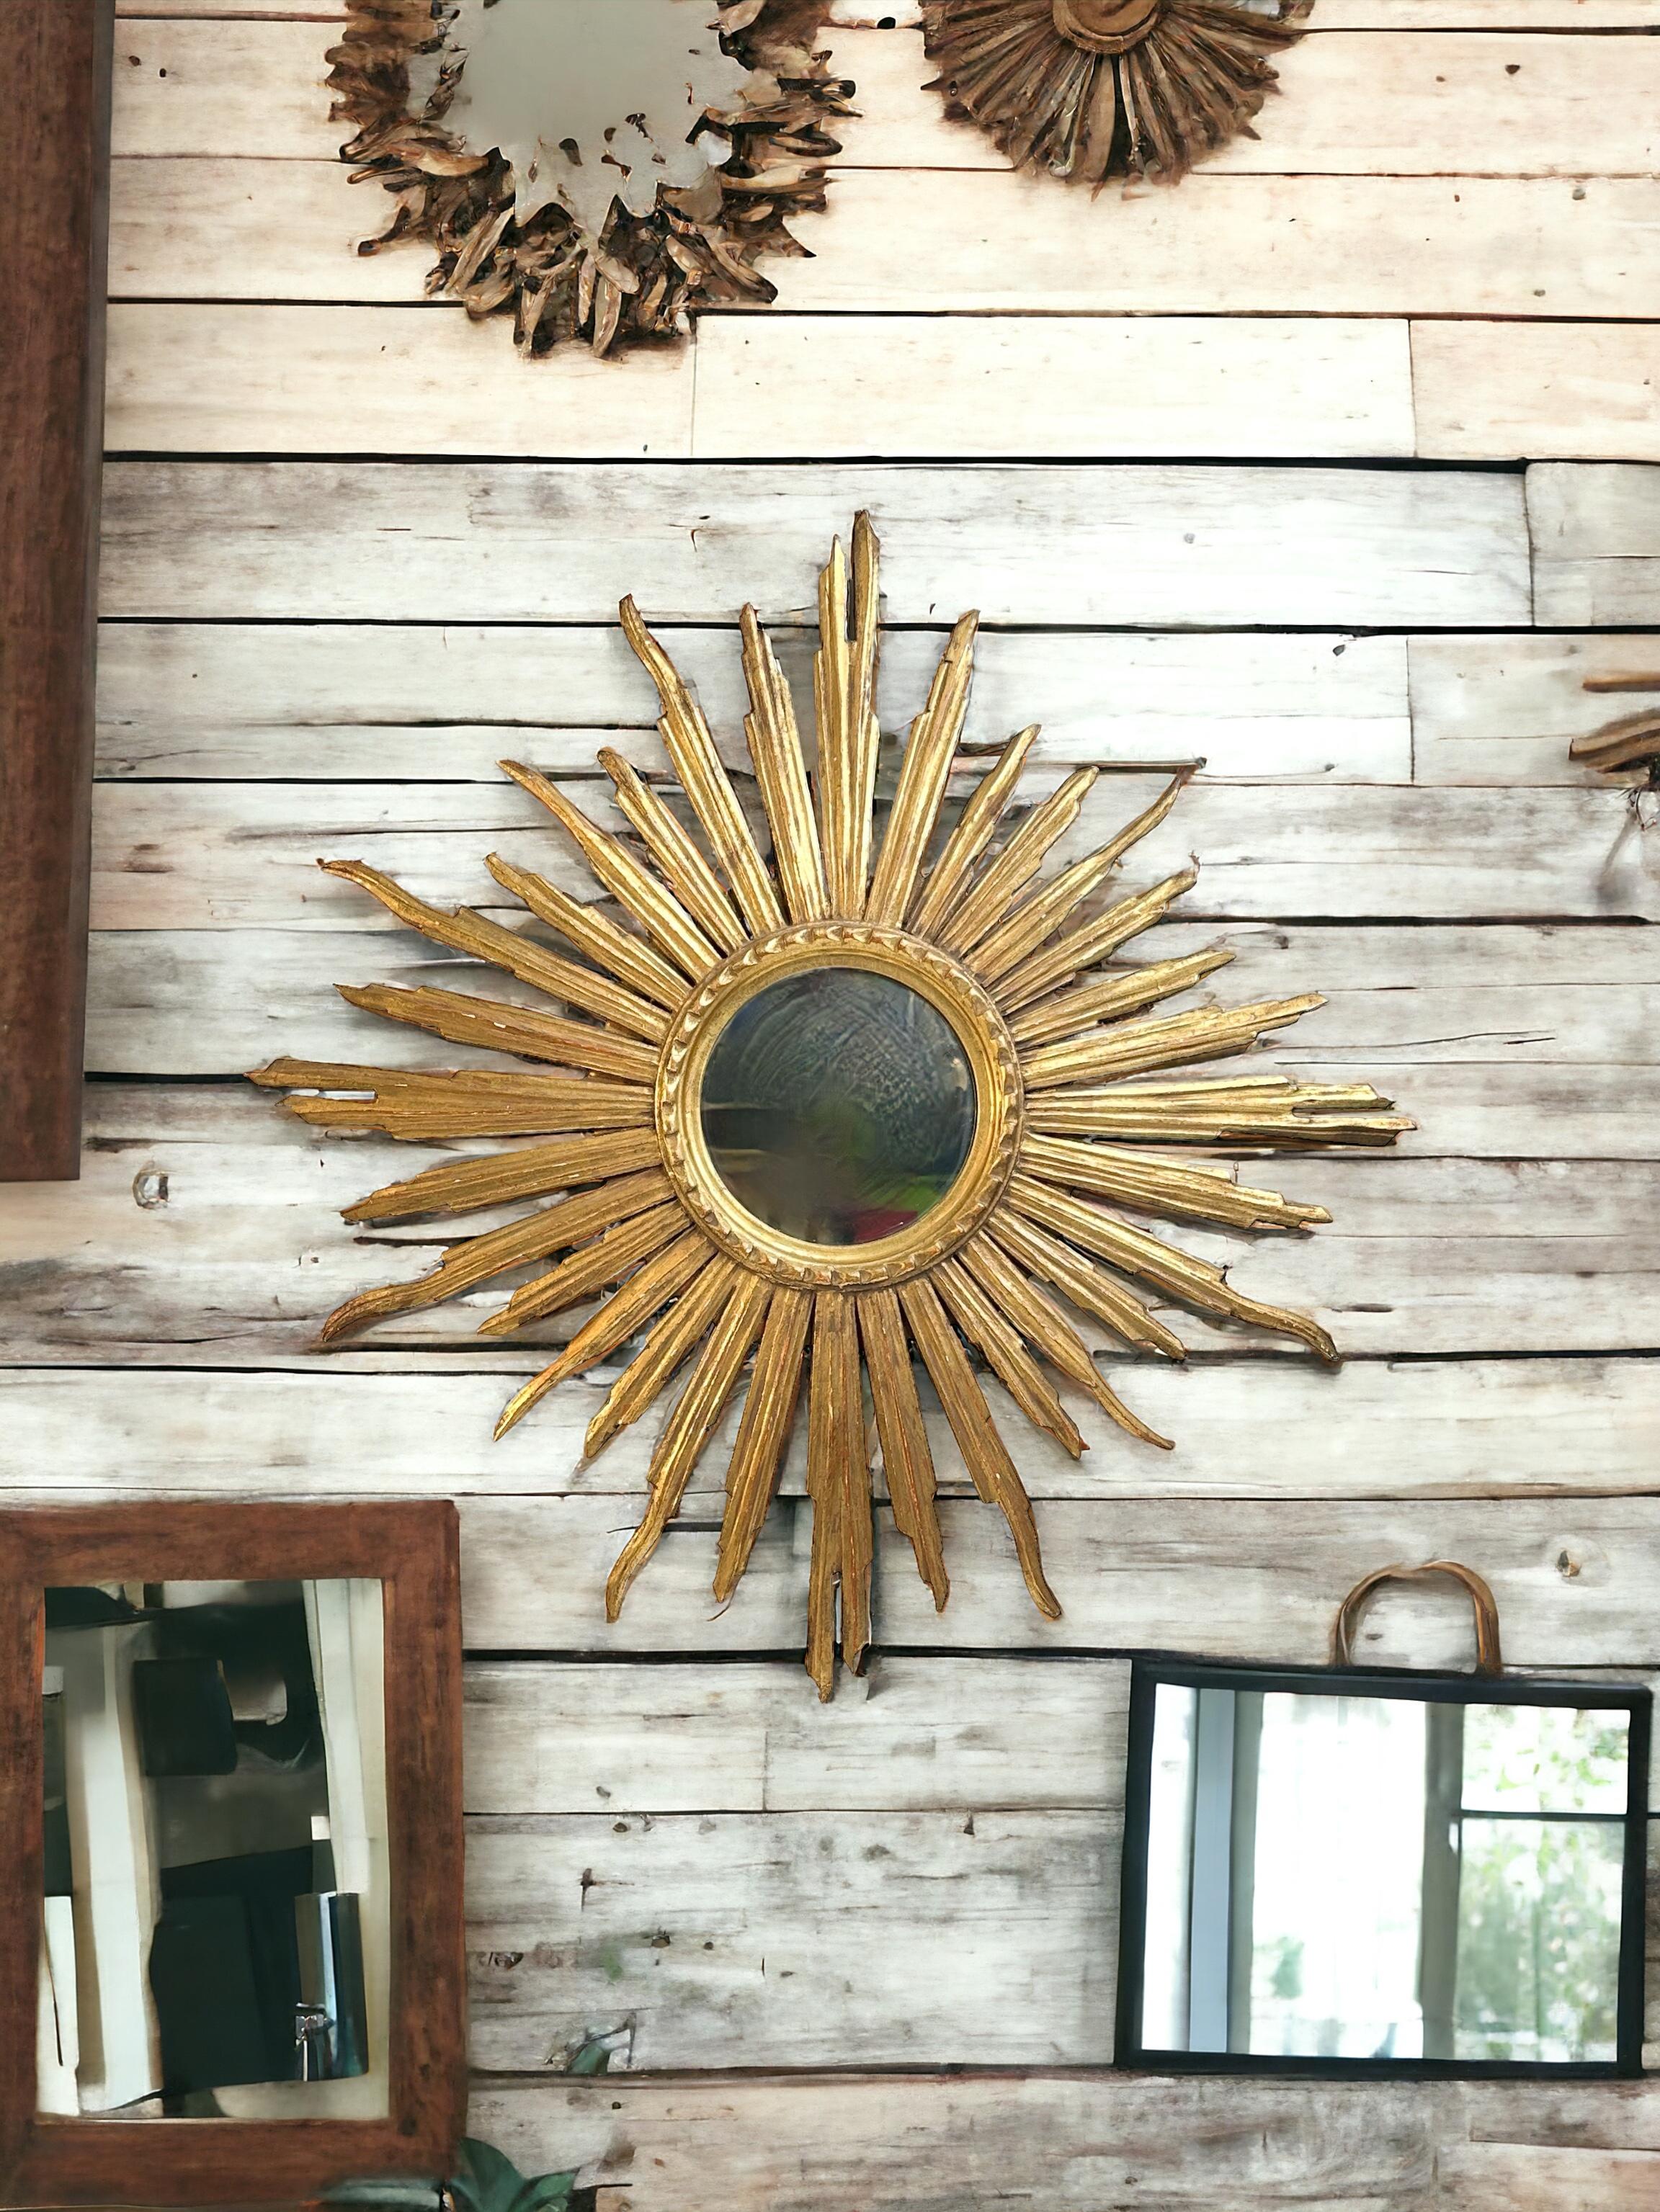 A gorgeous sunburst or starburst mirror. Made of gilded wood. It measures approximate: 30